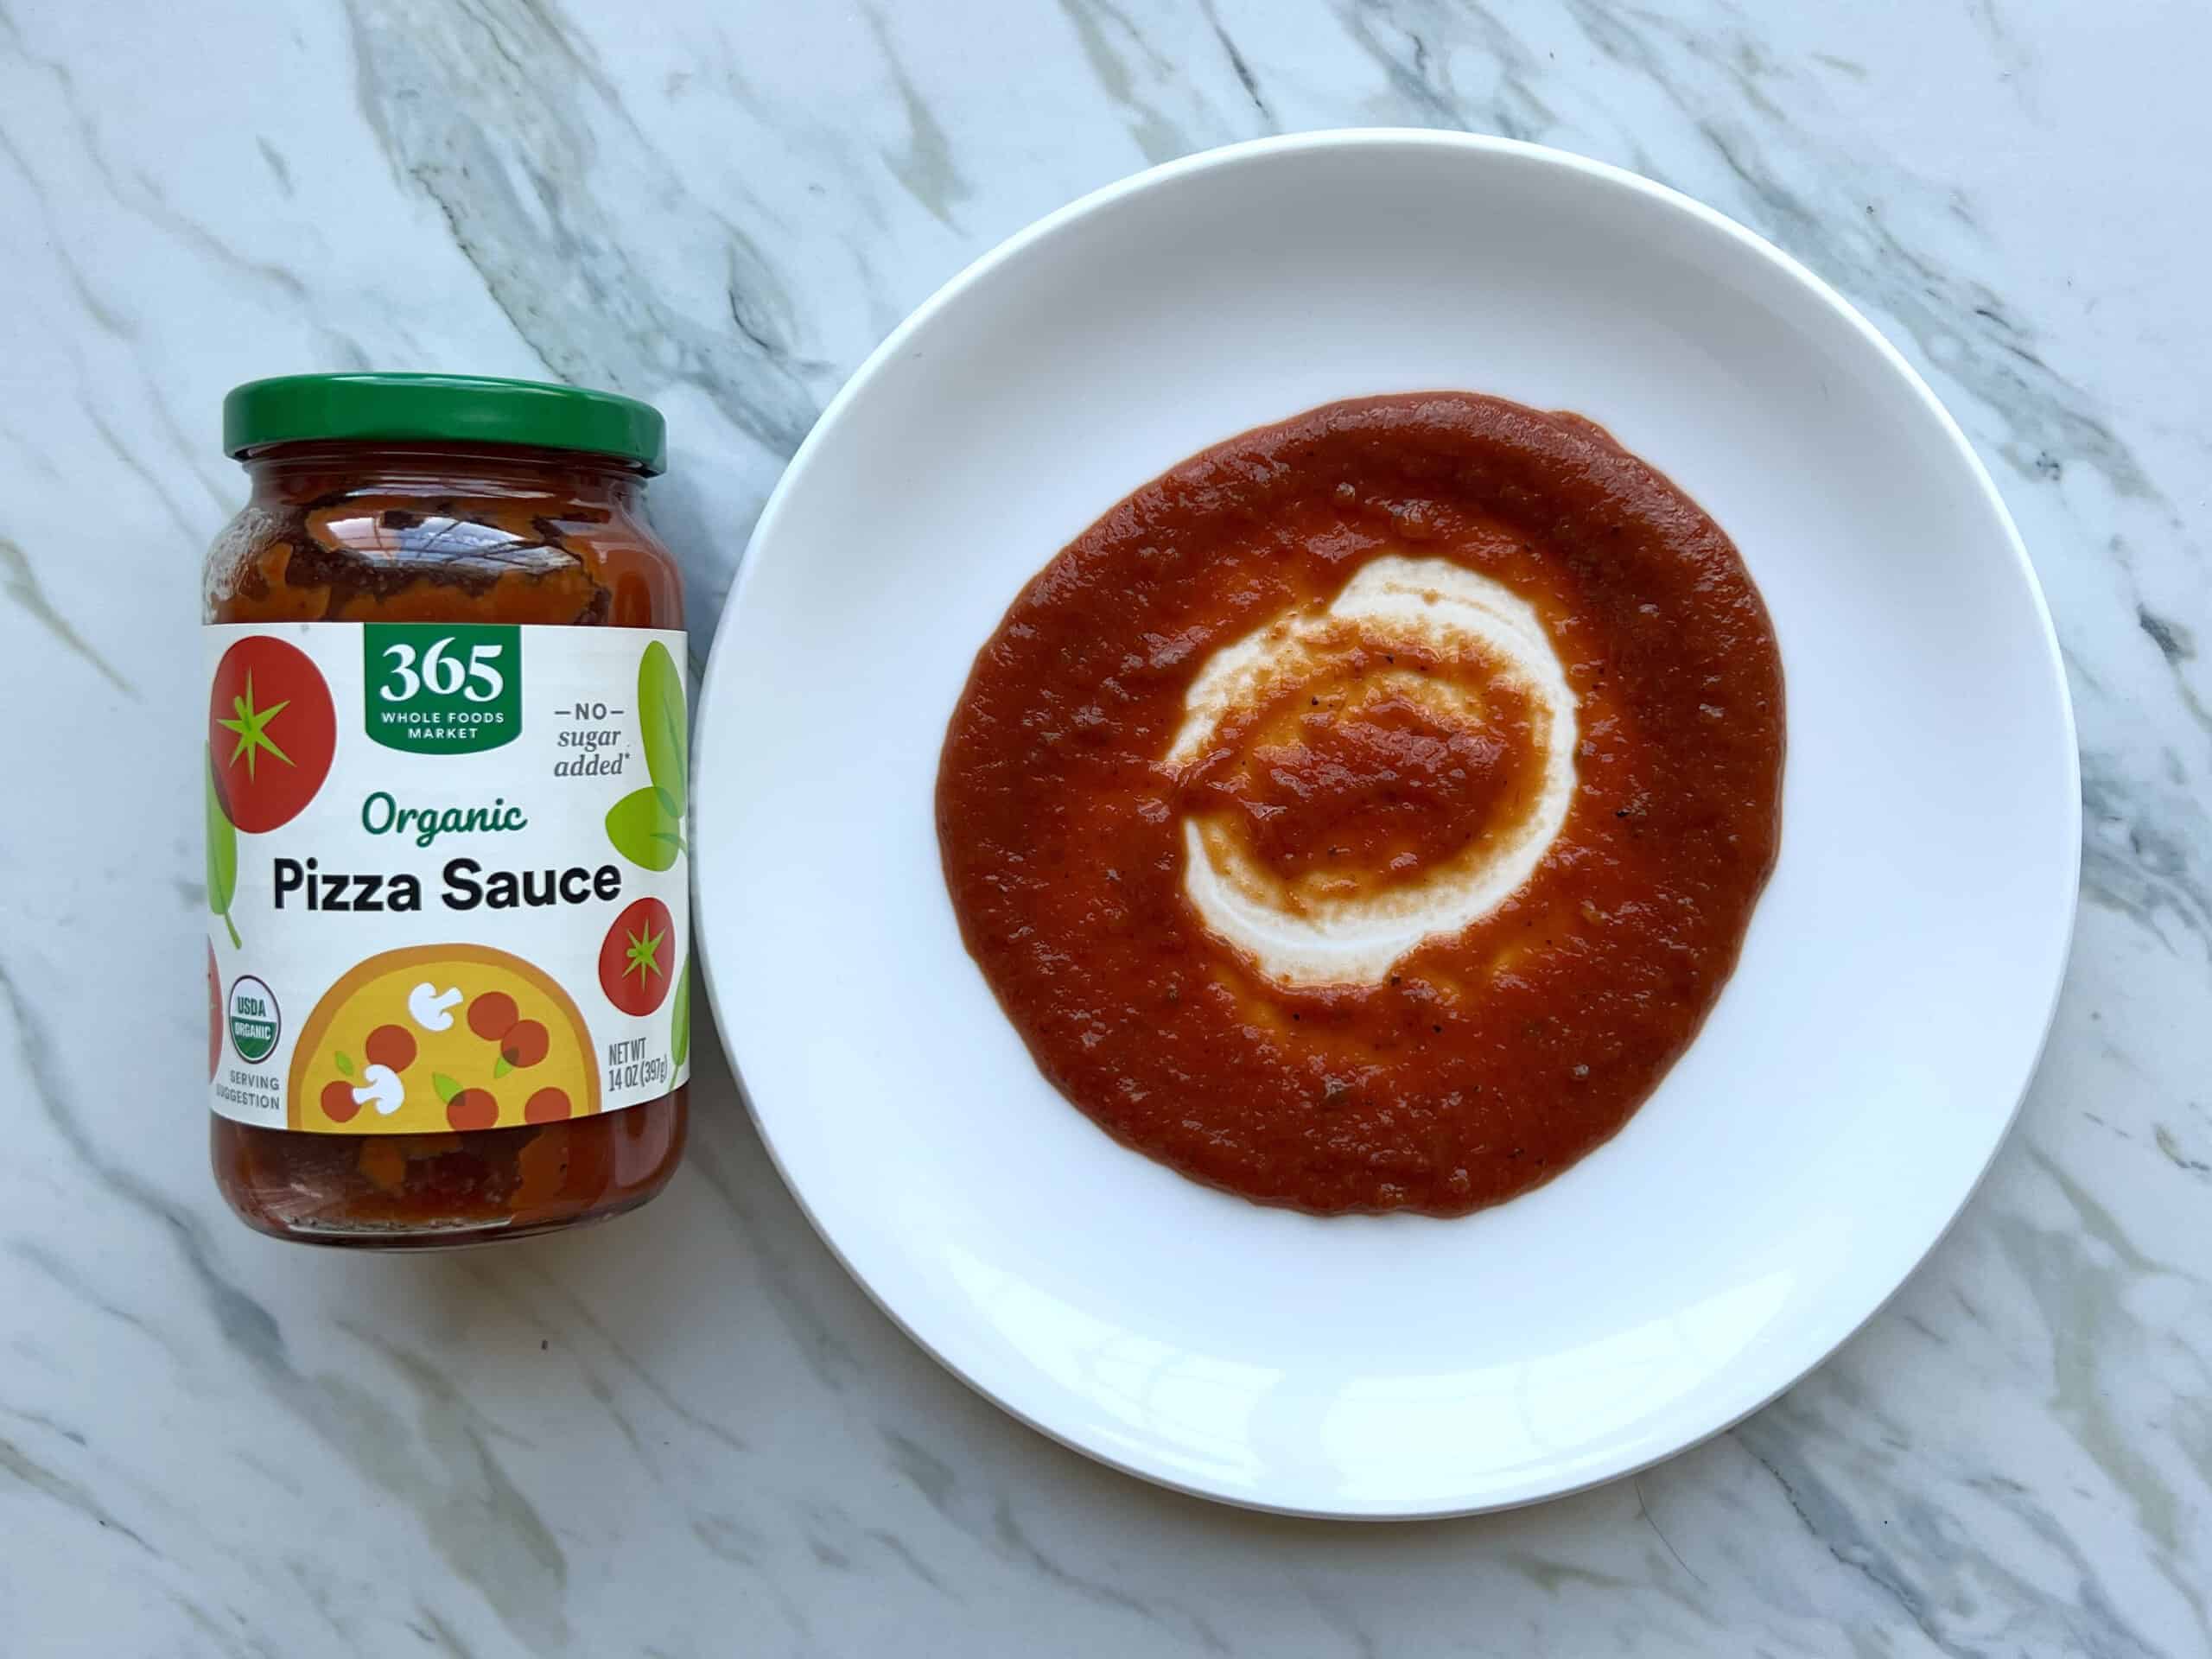 Organic Pizza Sauce, 14 oz at Whole Foods Market